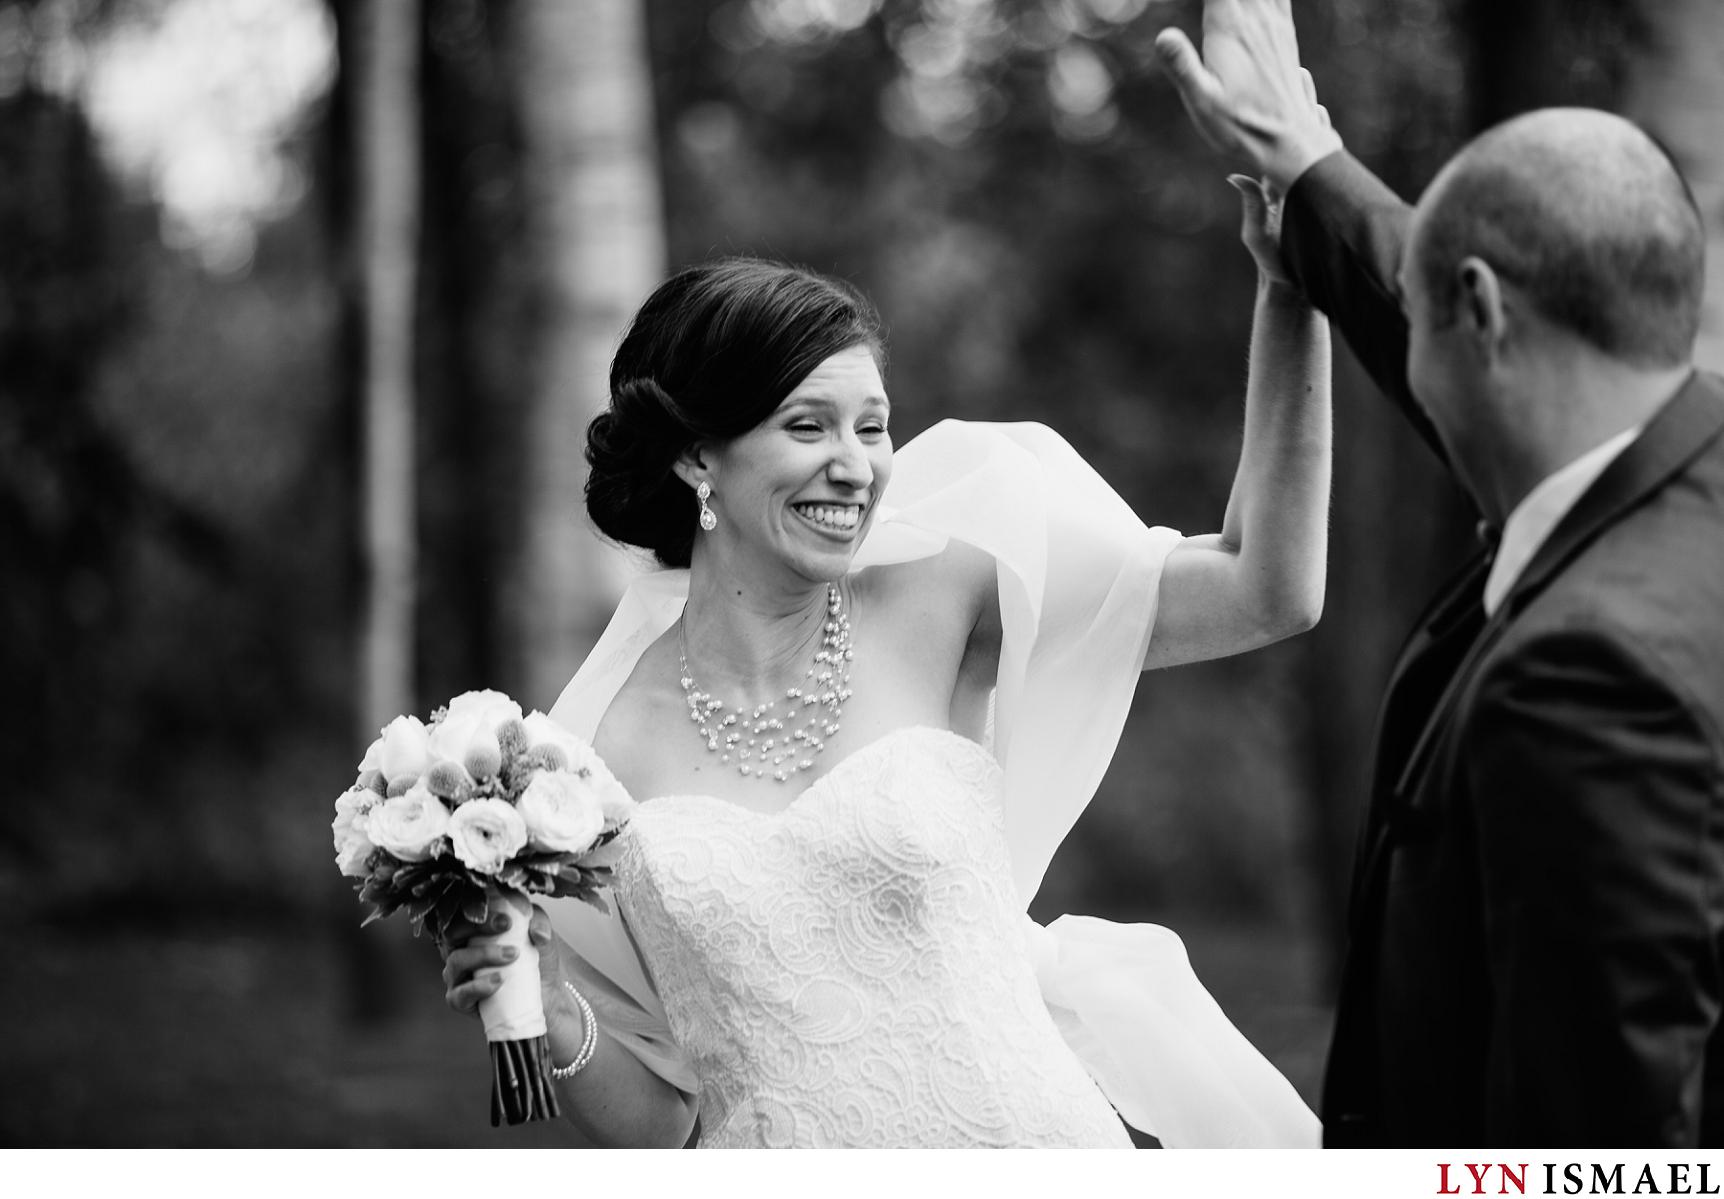 Bride and groom high fives each other